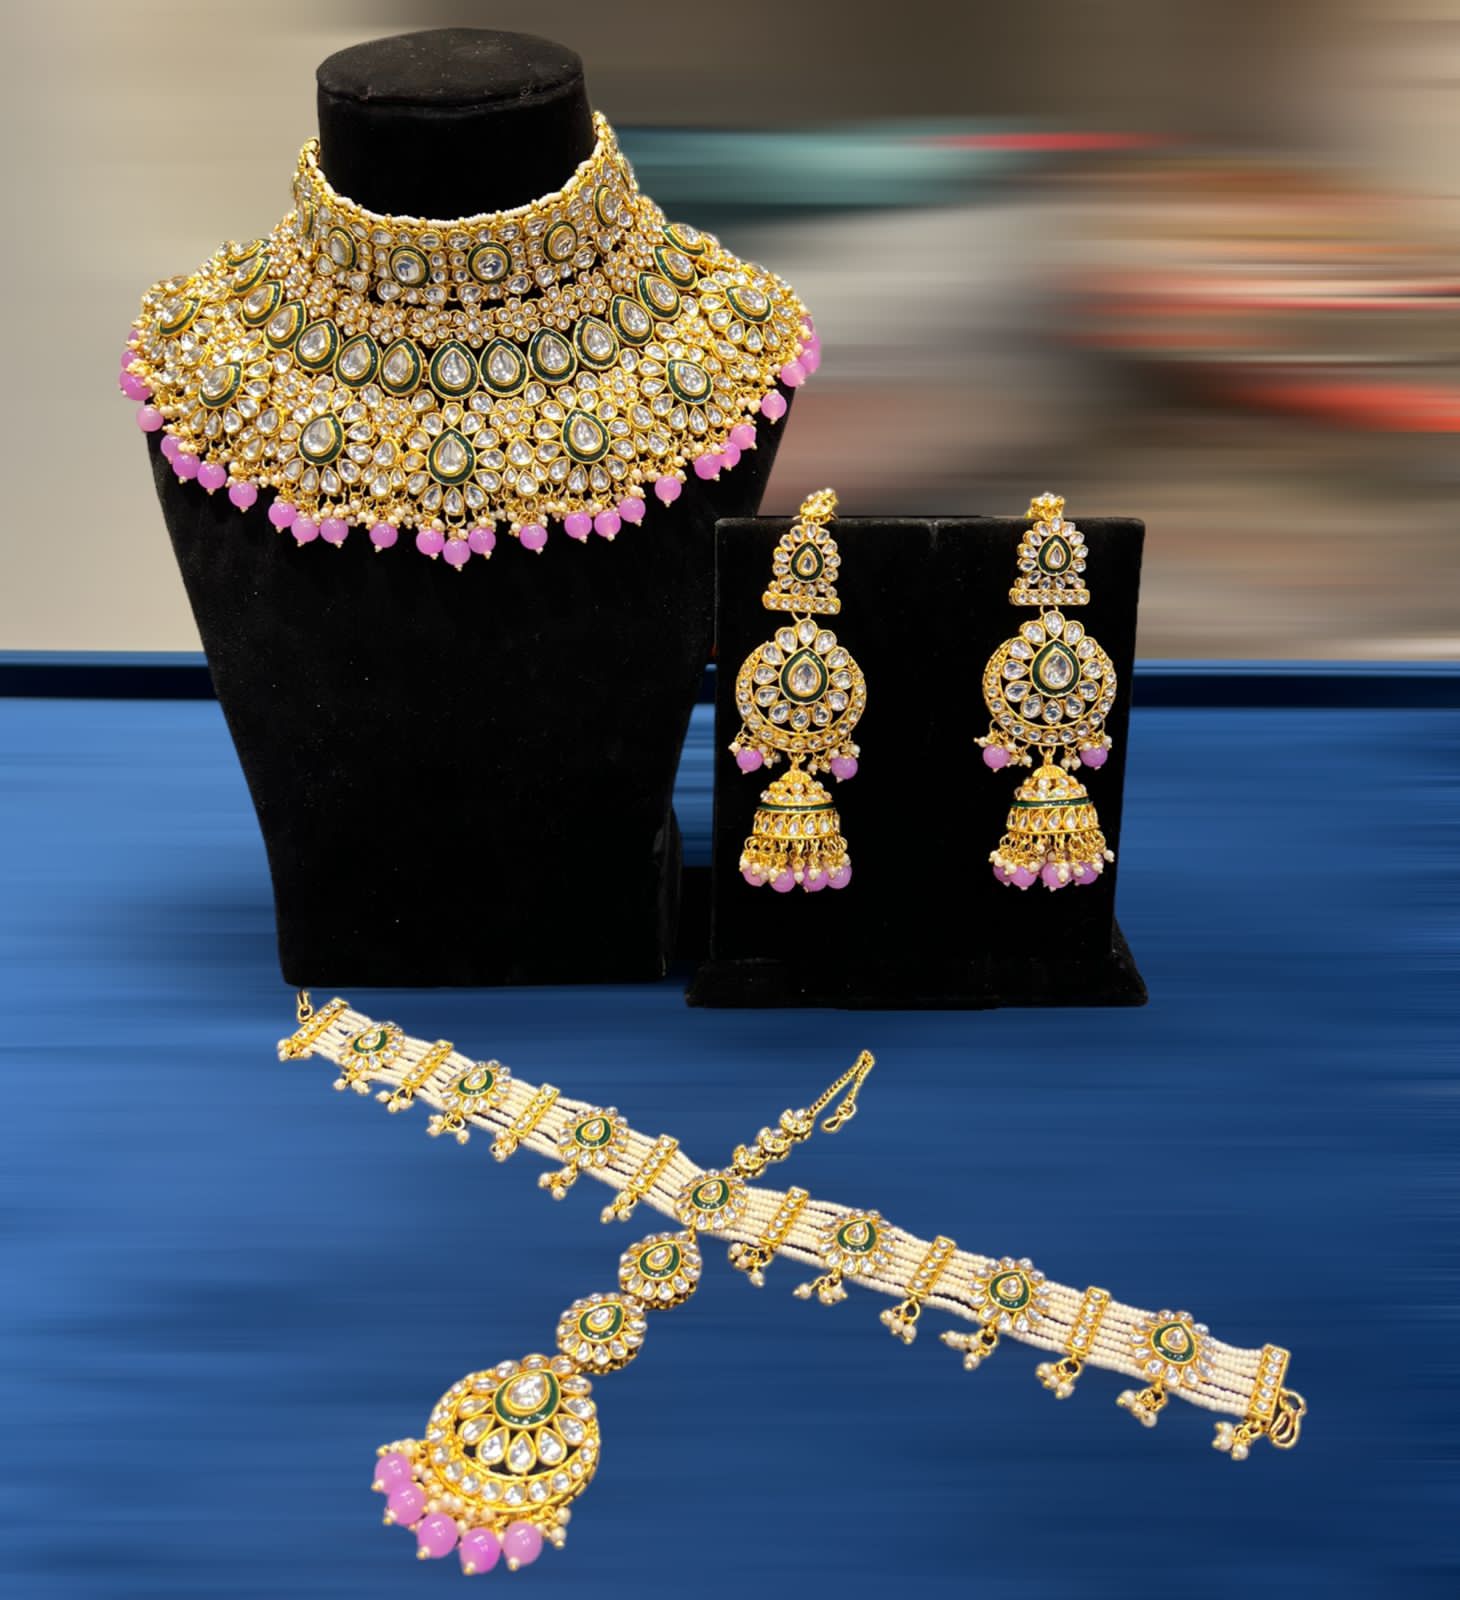 Zevar Necklace Pink Kundan Jewelry Collection: Exquisite Copper-Based Pieces in Delicate Elegance